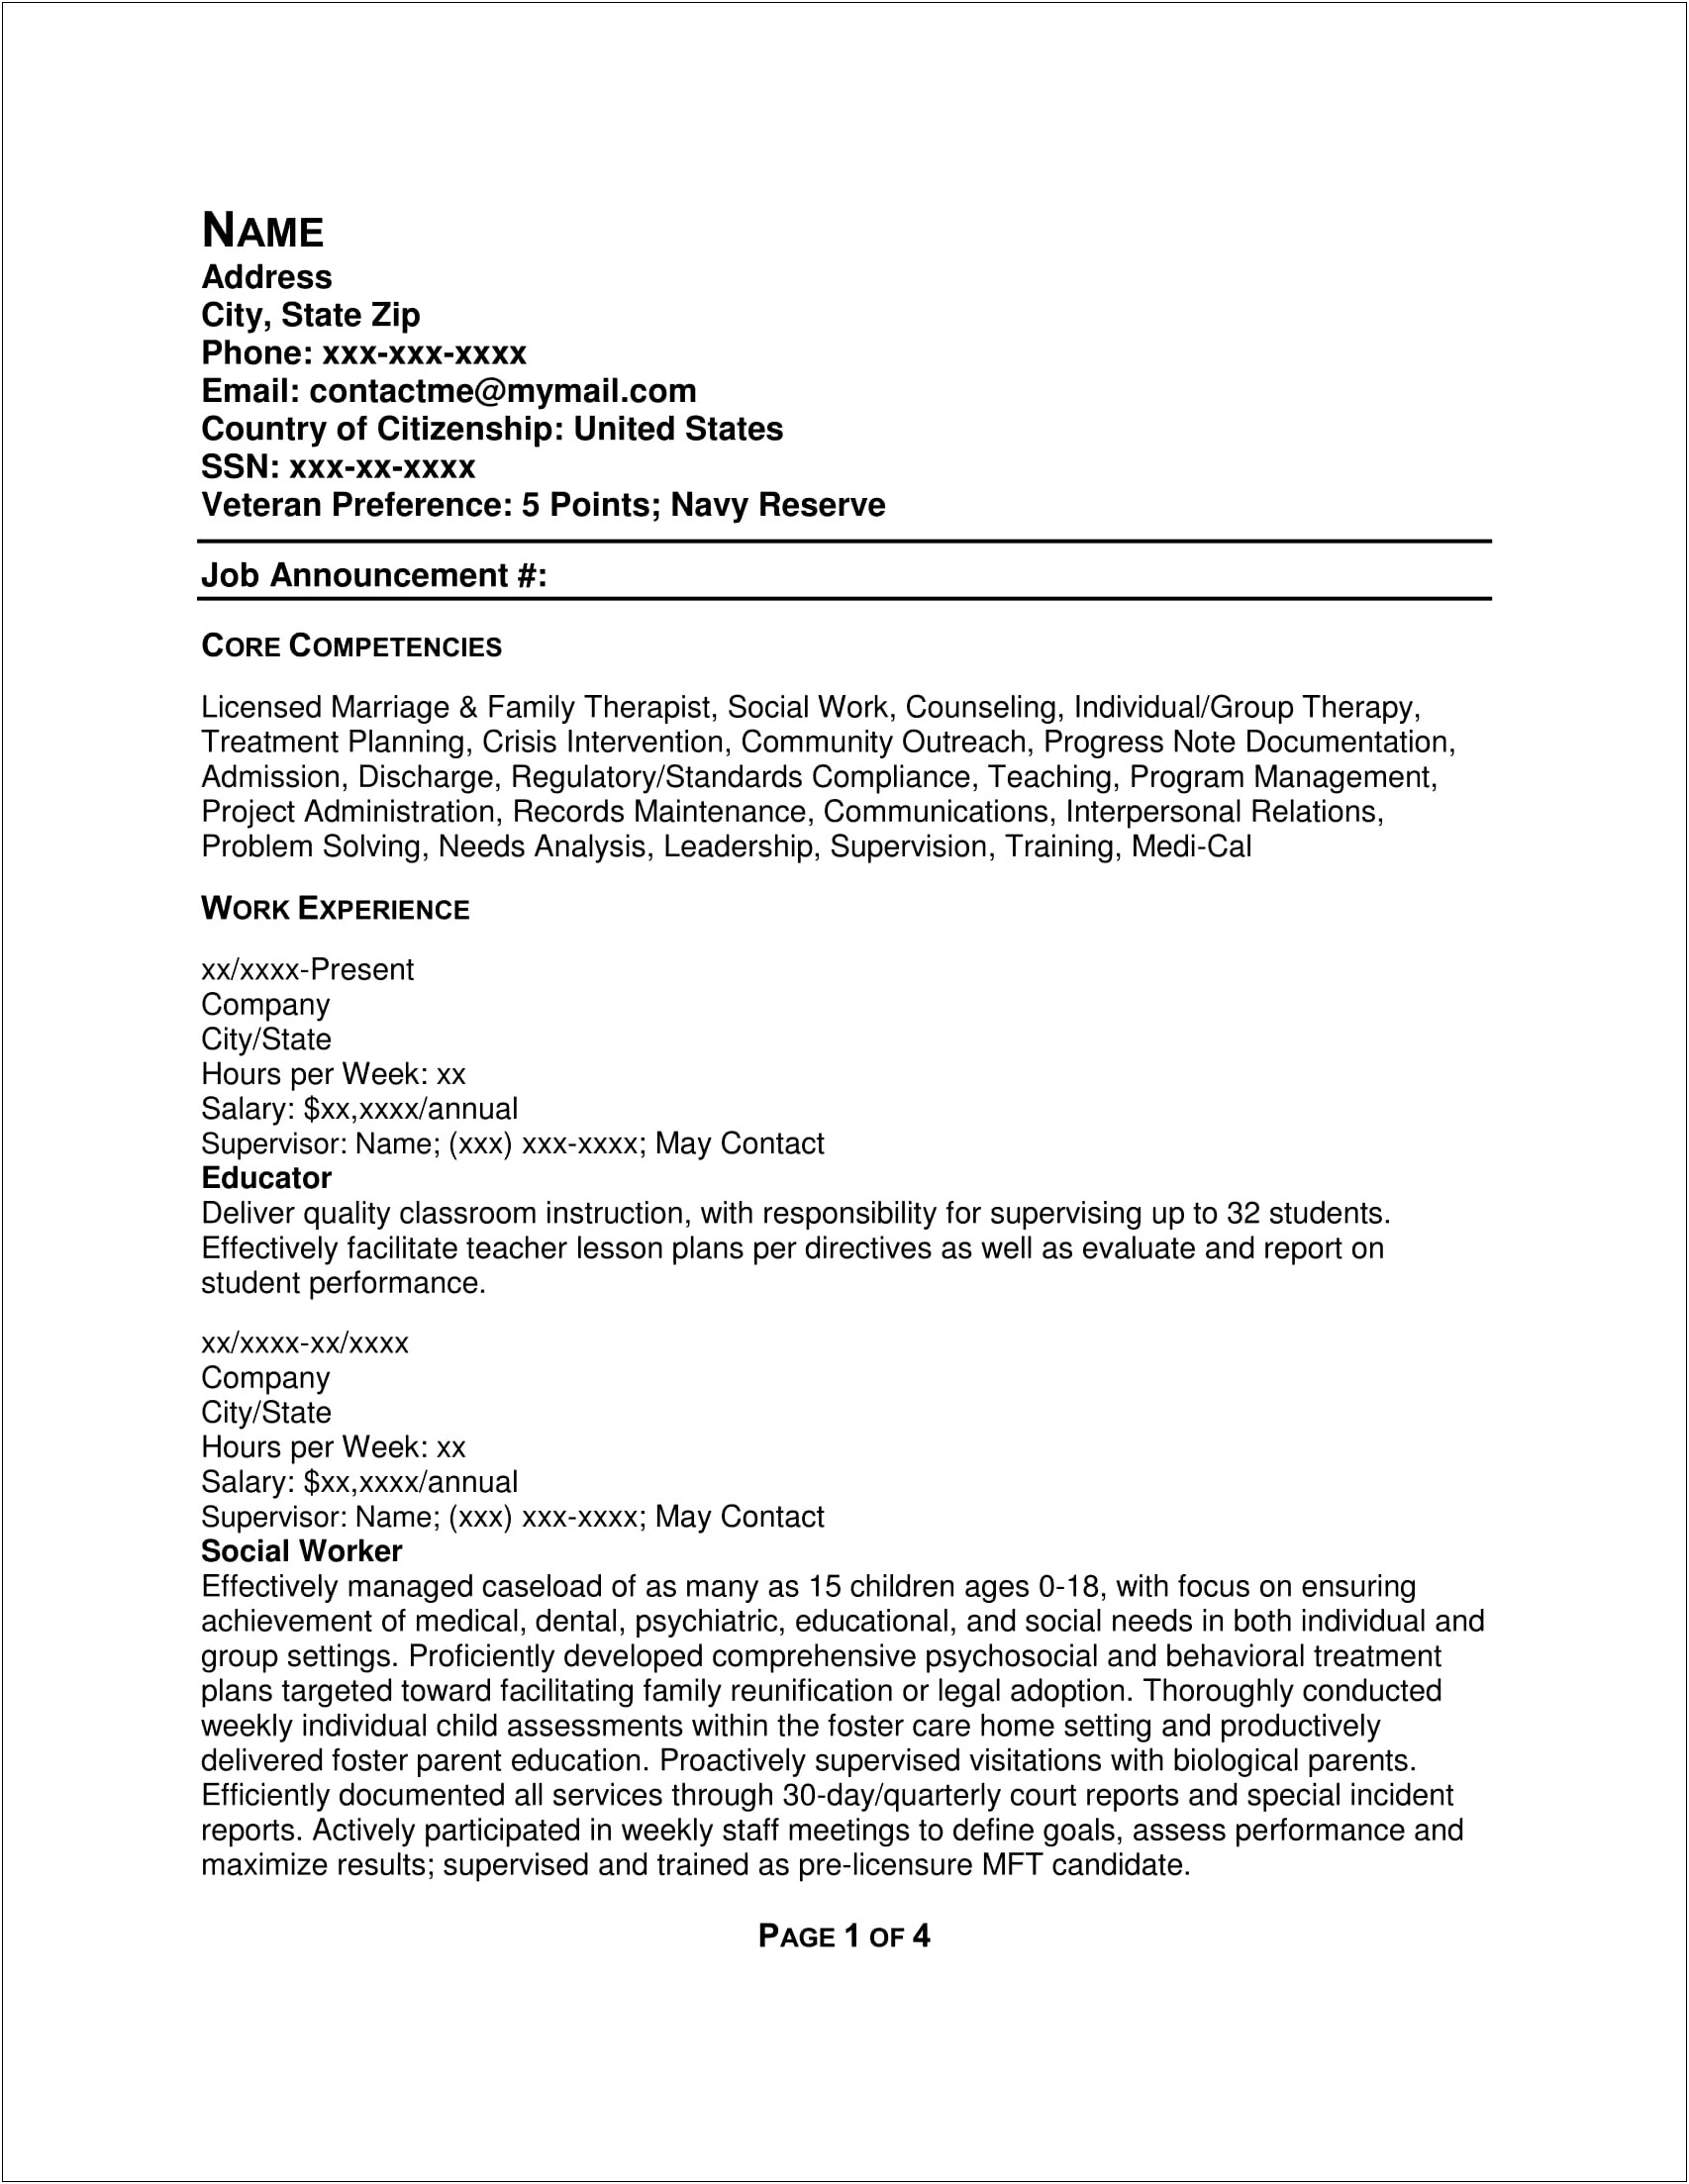 Sample Resume With Us Citizenship